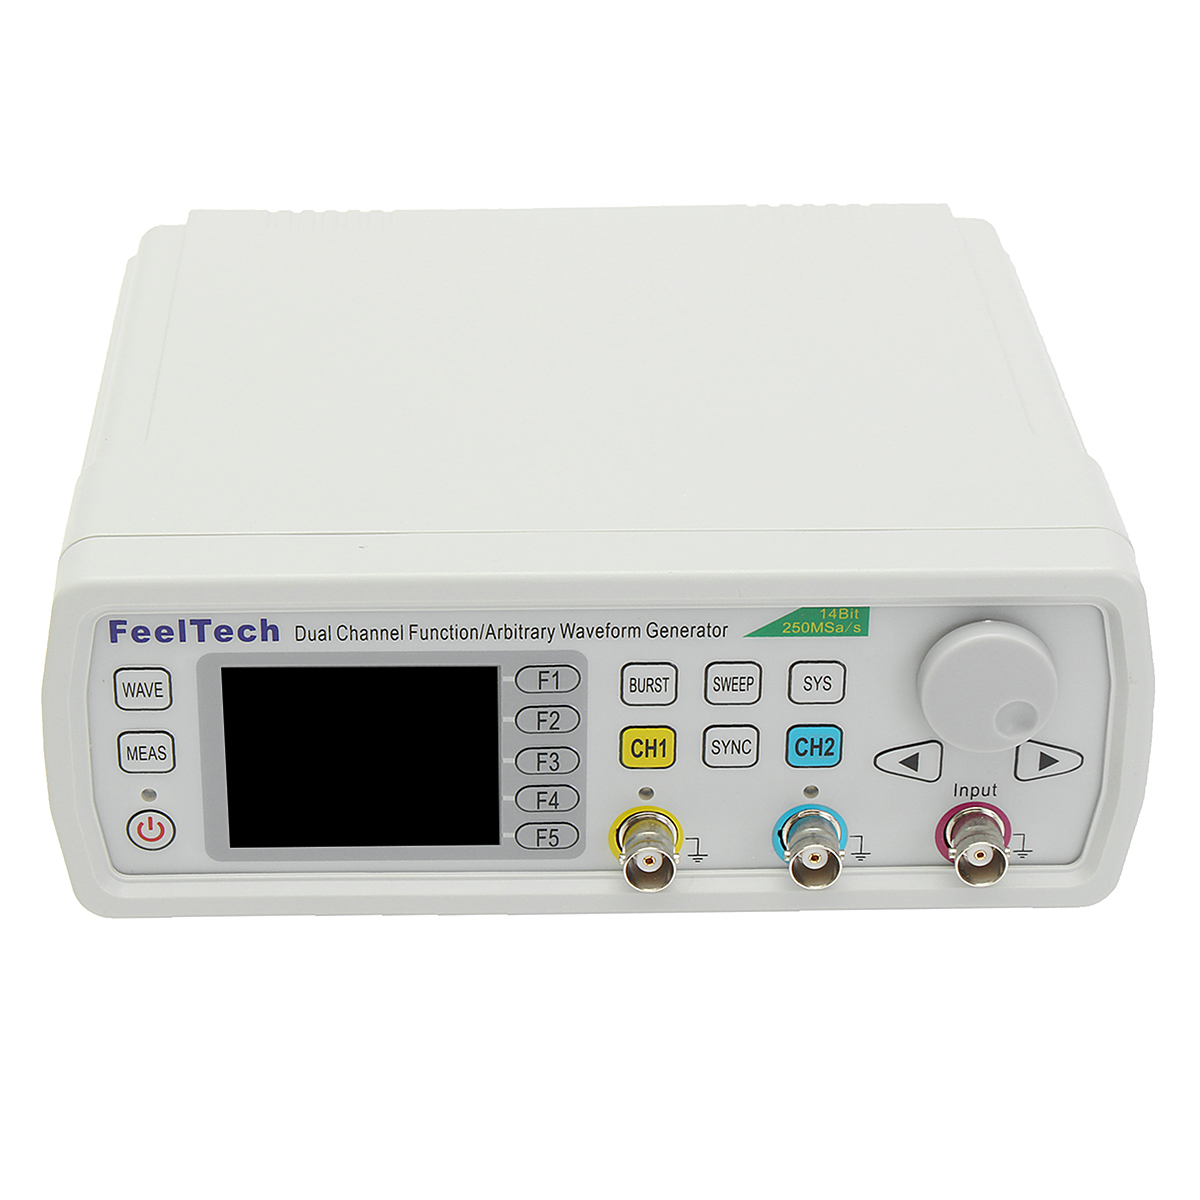 FY6600 Digital 12-60MHz Dual Channel DDS Function Arbitrary Waveform Signal Generator Frequency Meter 17